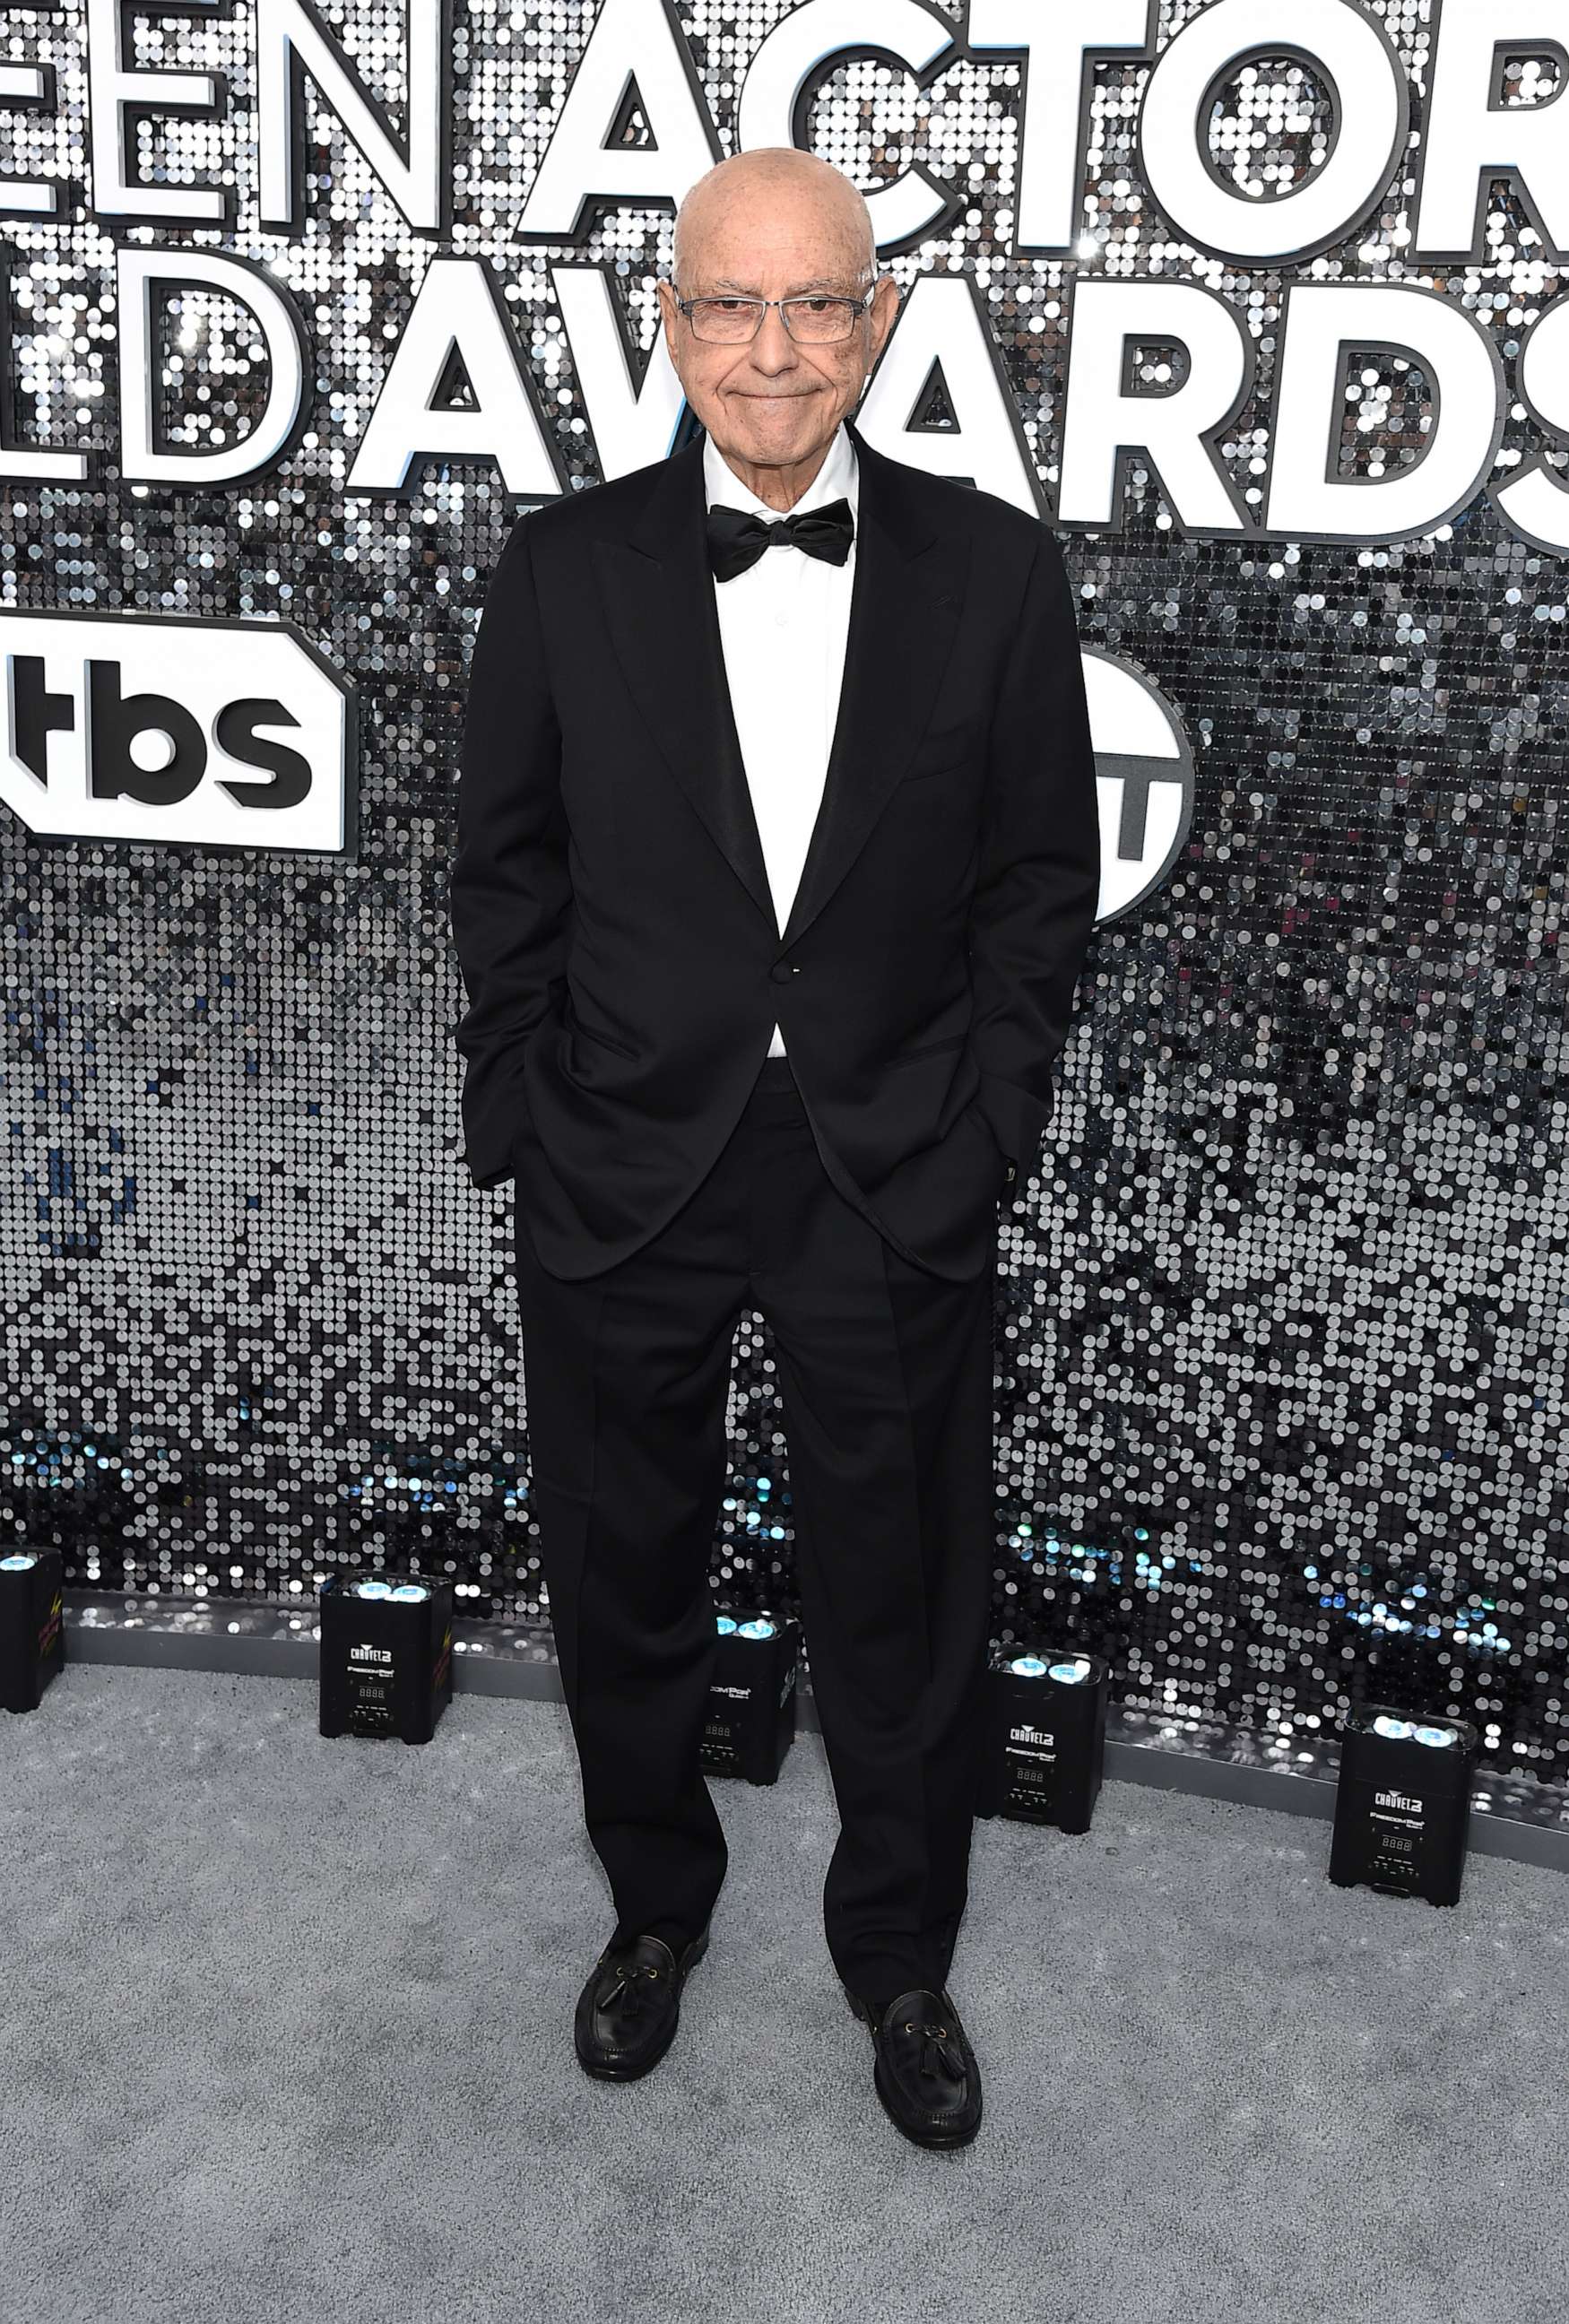 PHOTO: Alan Arkin attends the 26th Annual Screen Actors Guild Awards at The Shrine Auditorium on Jan. 19, 2020 in Los Angeles.